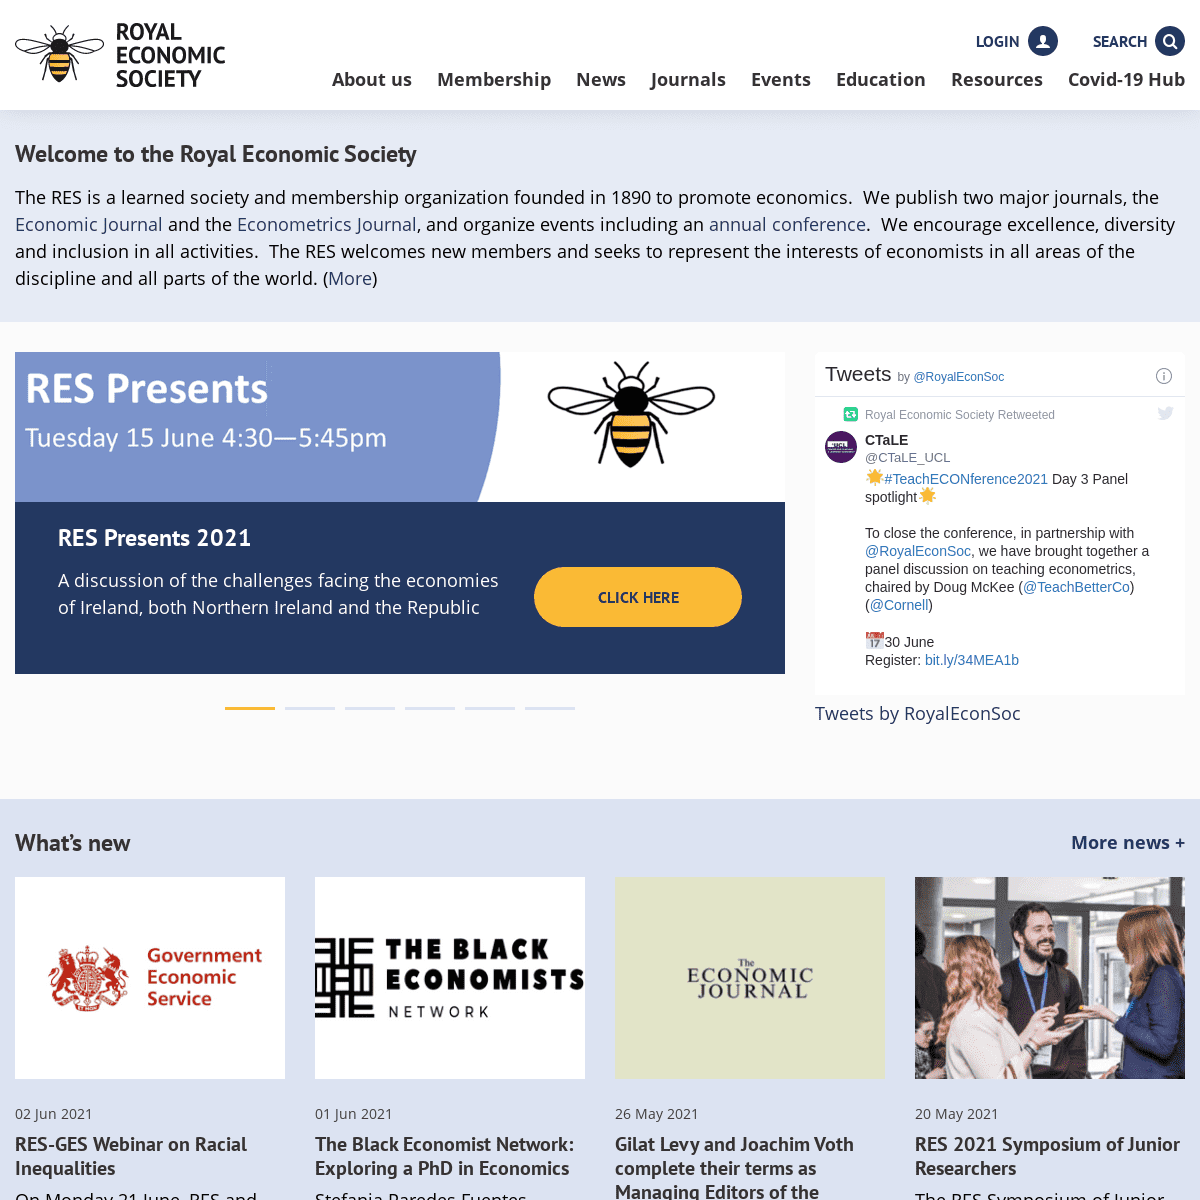 A complete backup of https://res.org.uk